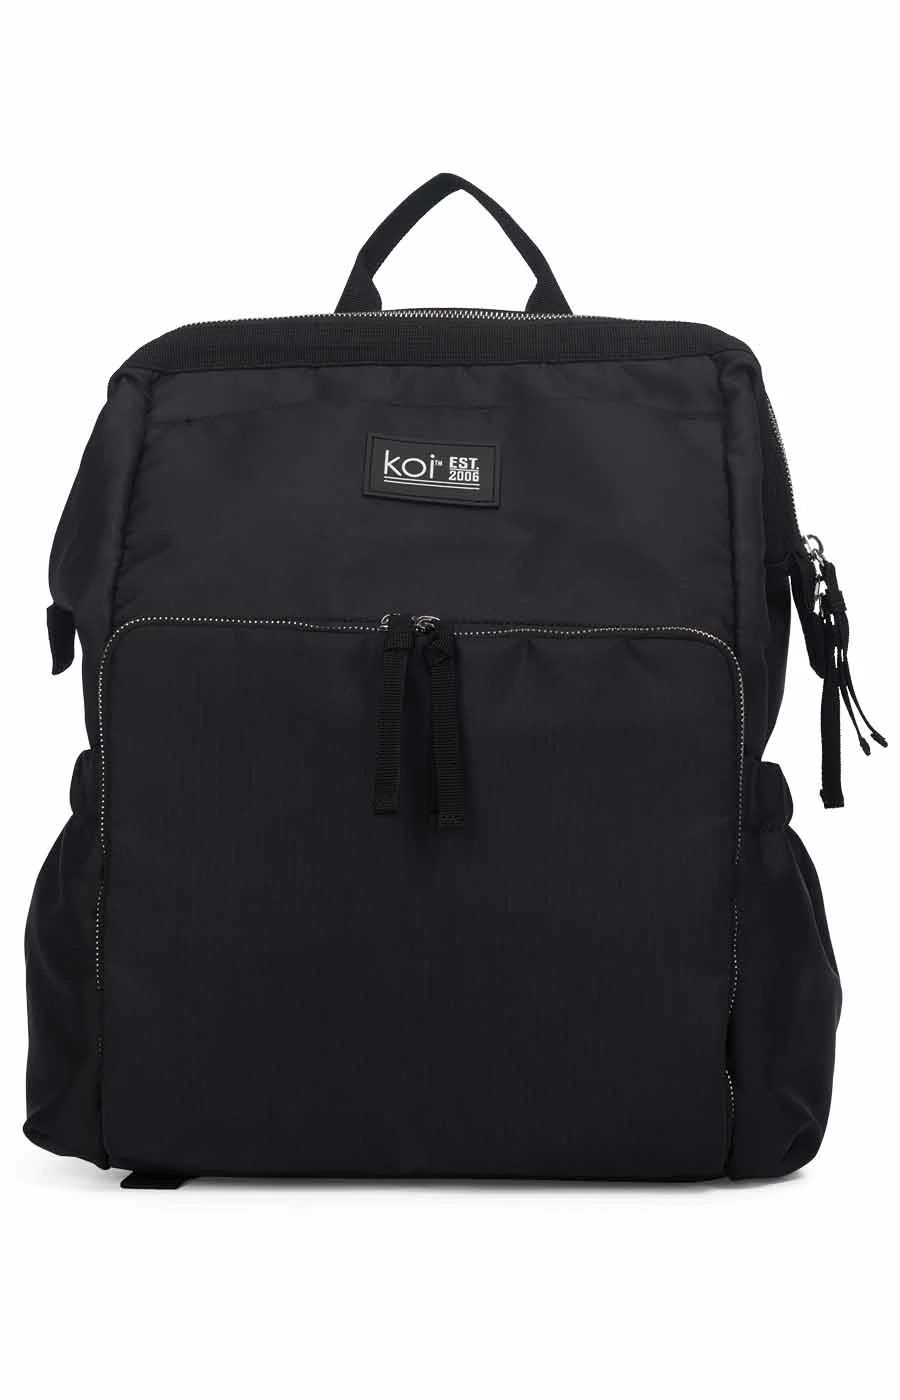  Koi Next Gen All You Need Utility Backpack A184